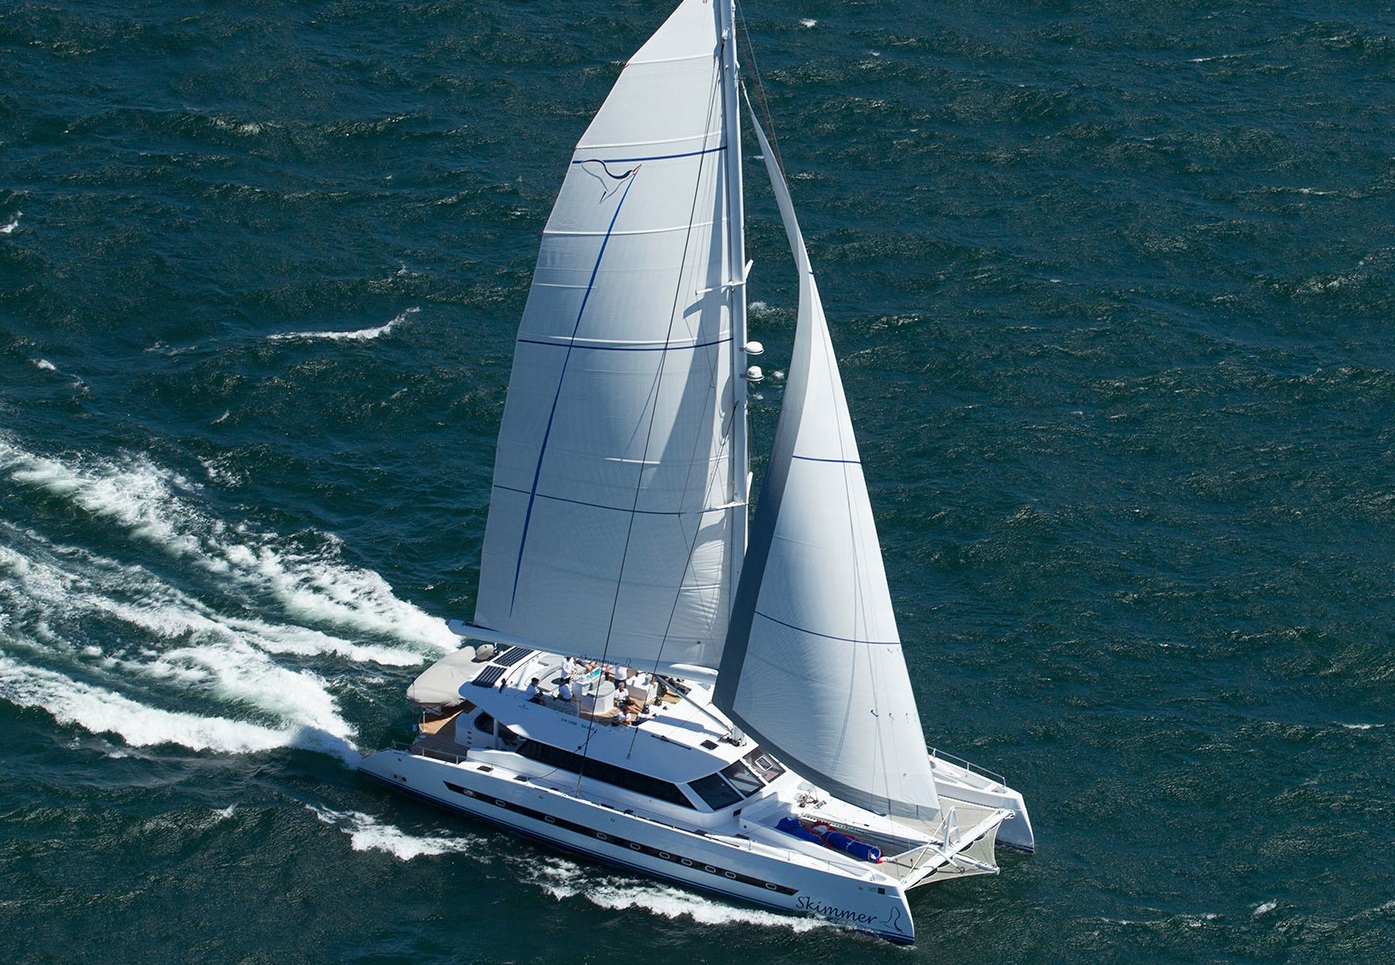 Colophon Launches the New Website for The Multihull Company